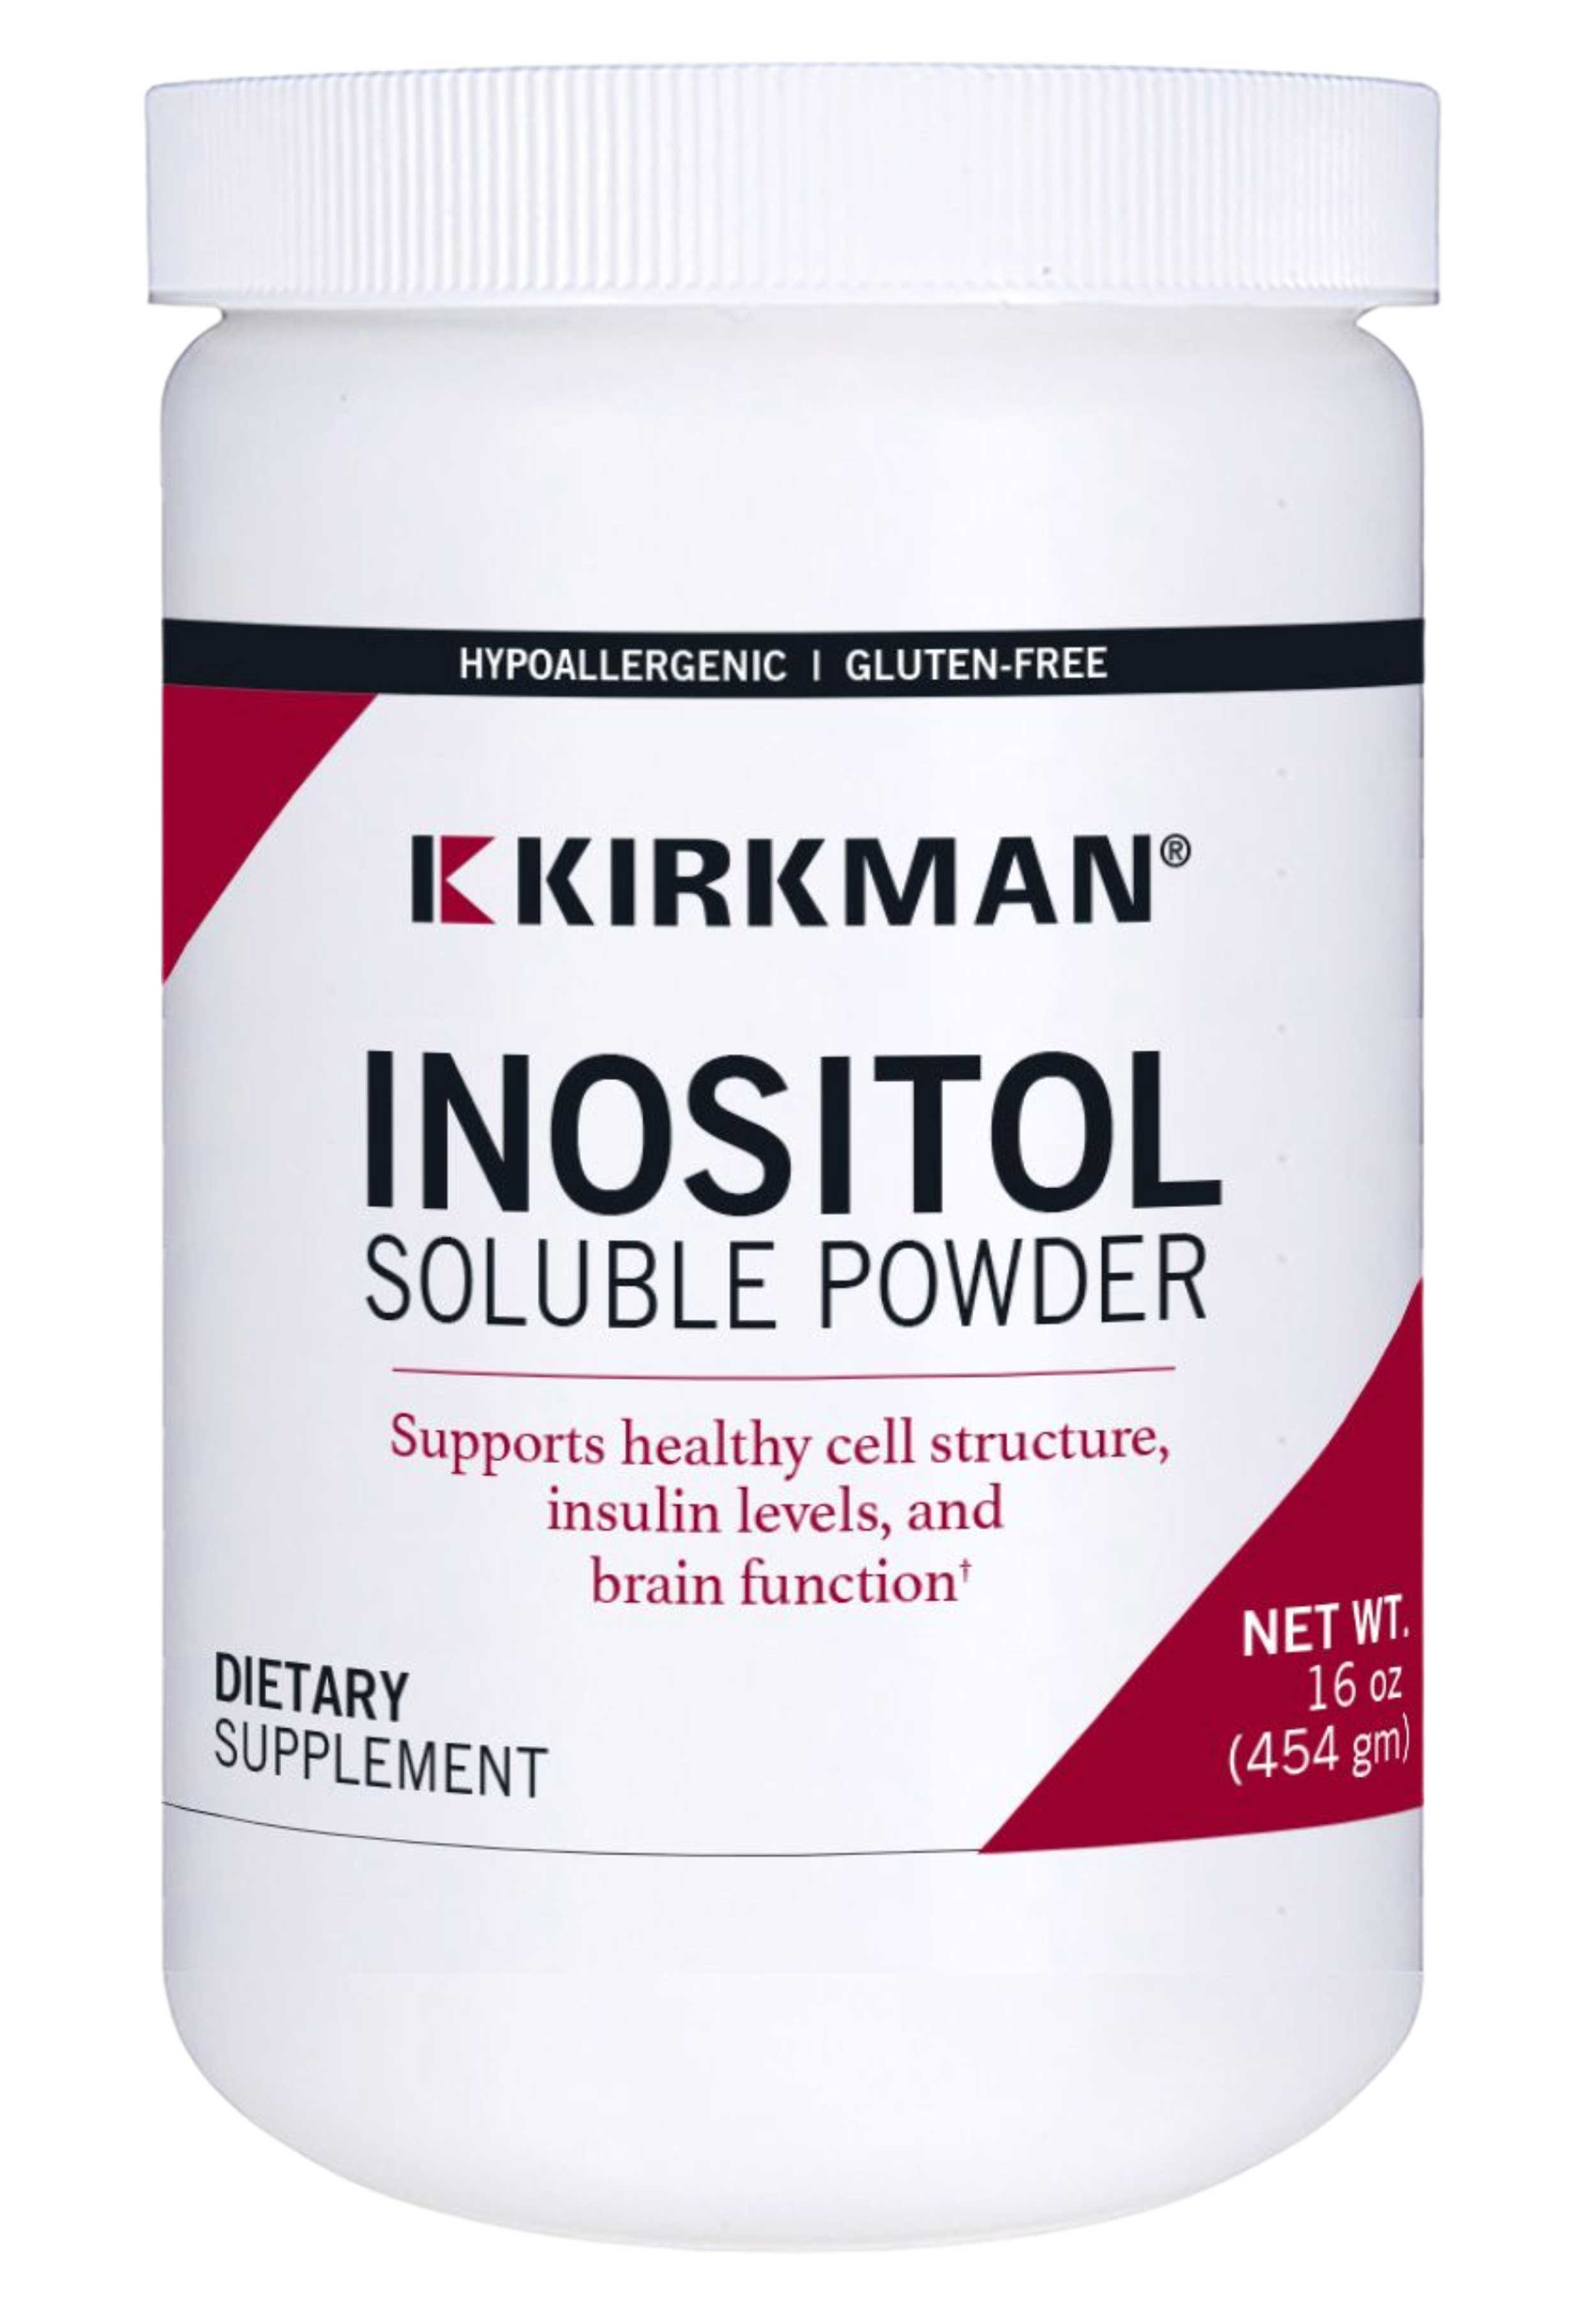 Kirkman Inositol Soluble Powder (Formerly Inositol Pure Soluble Powder)